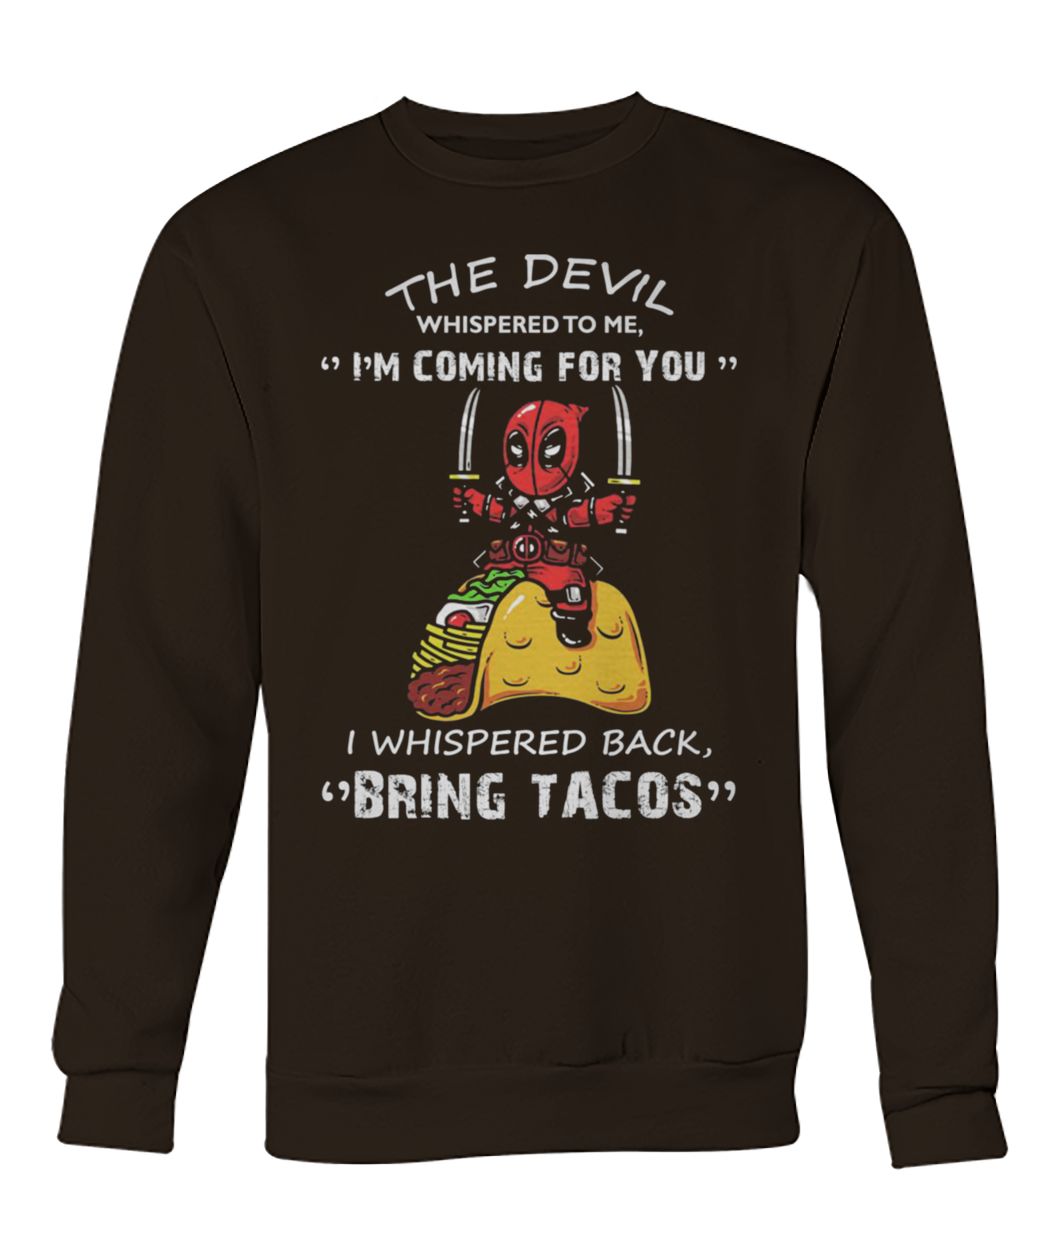 Deadpool the devil whispered to me I’m coming for you I whispered back bring tacos crew neck sweatshirt